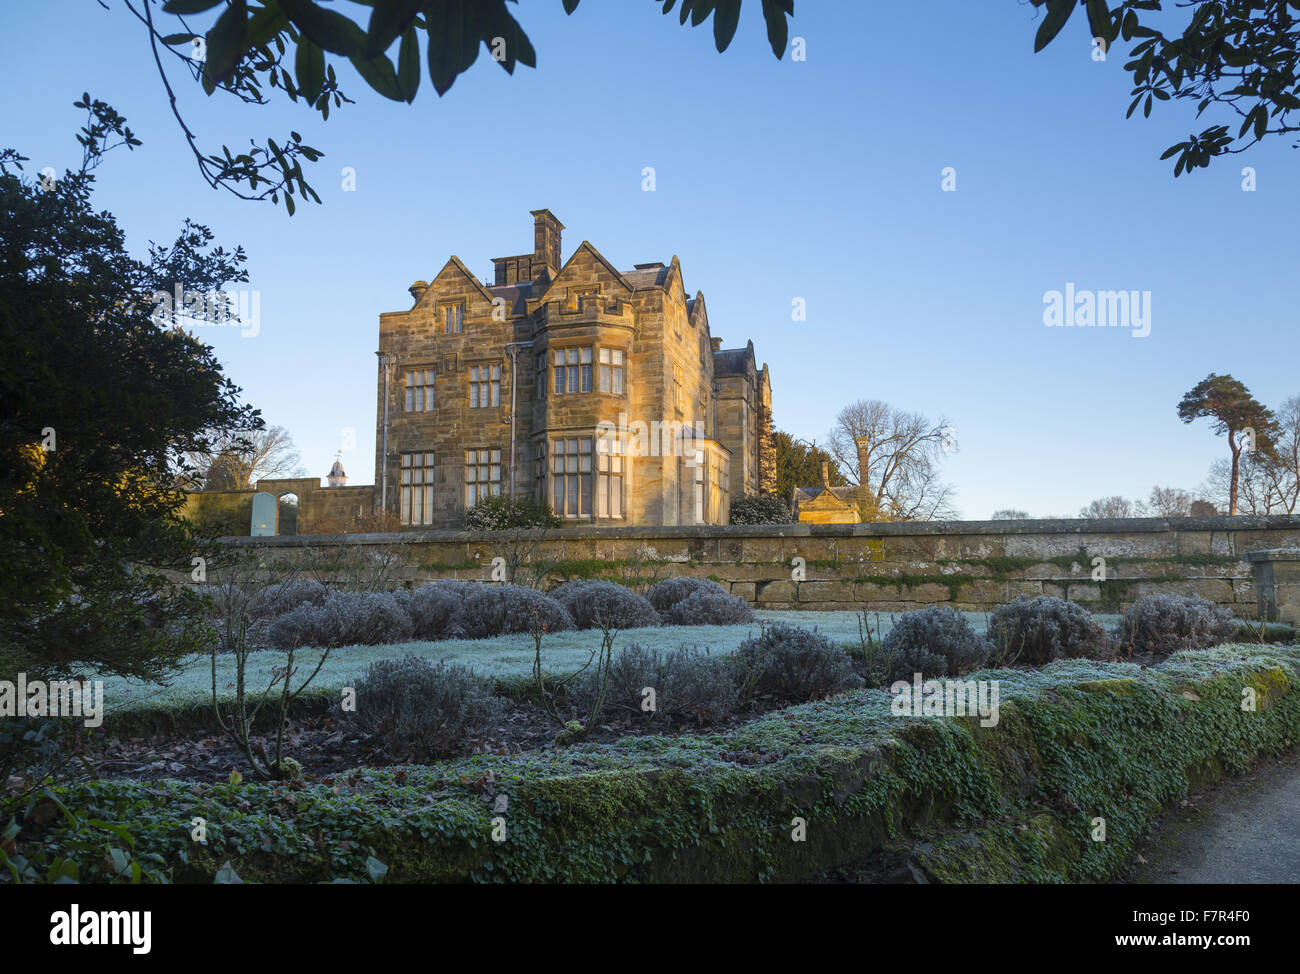 A winter's day at Scotney Castle, Kent. Scotney features a 14th century moated castle, a Victorian mansion and a romantic garden. Stock Photo